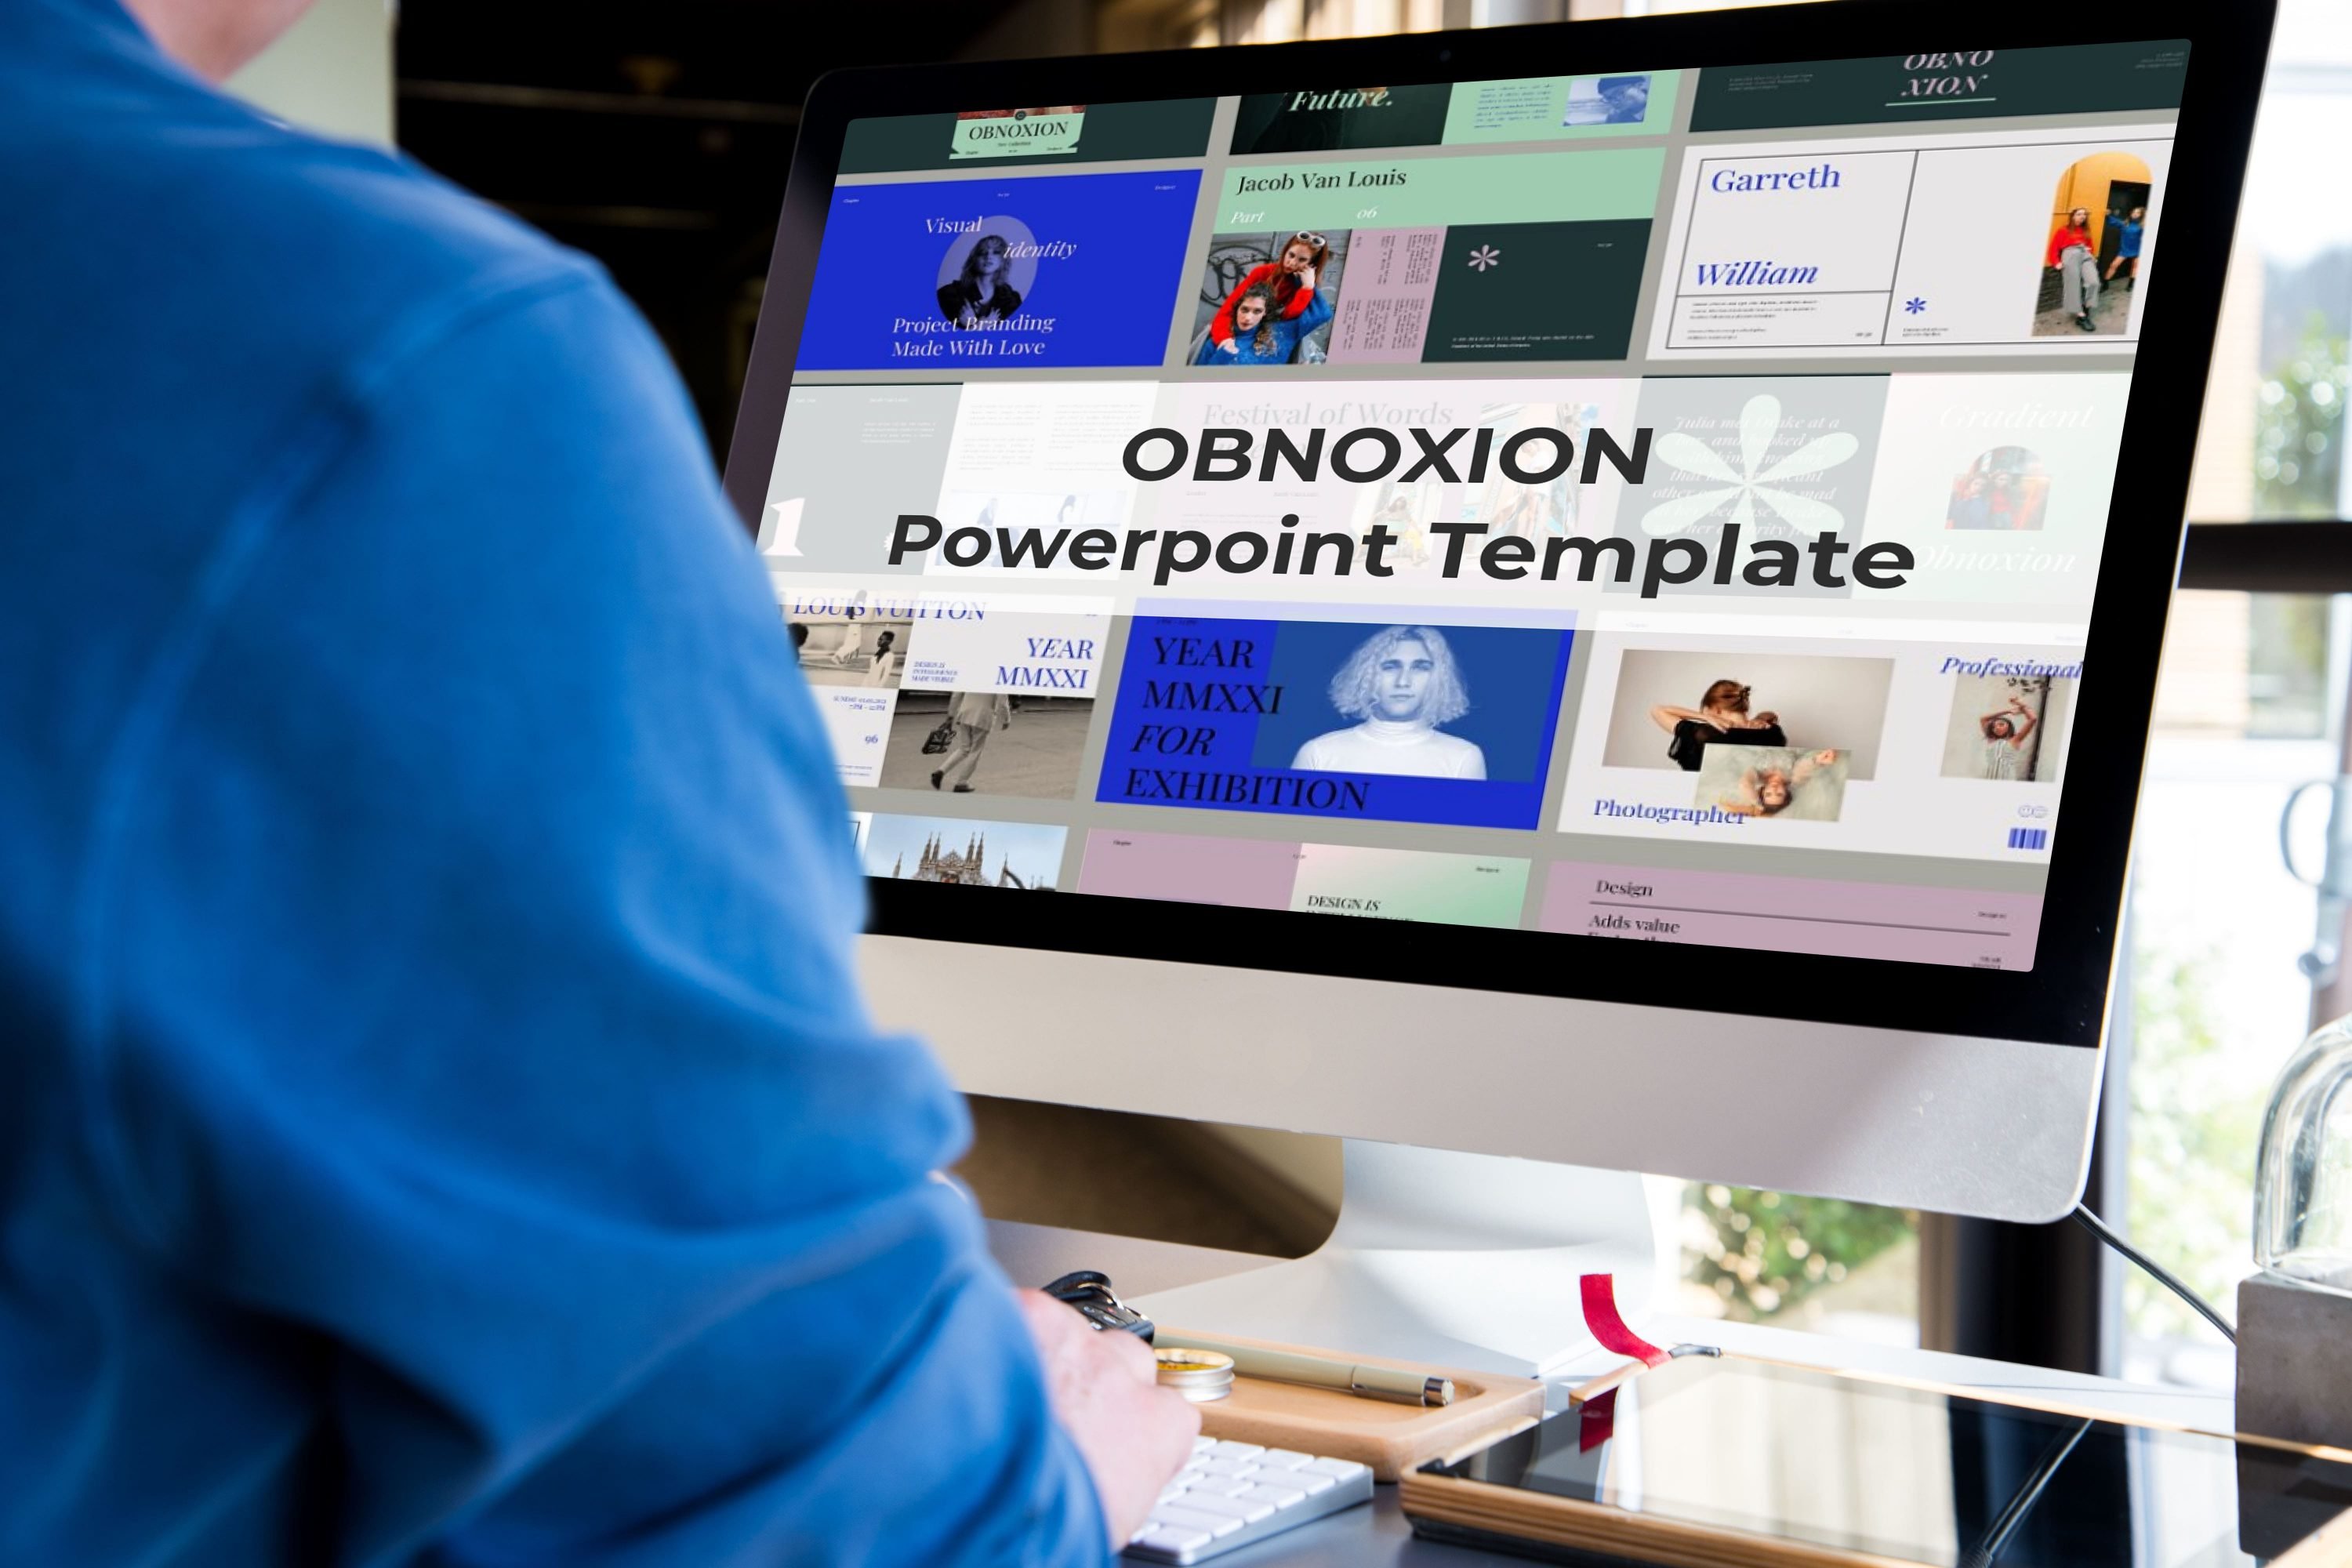 Desktop option of the OBNOXION Powerpoint Template.